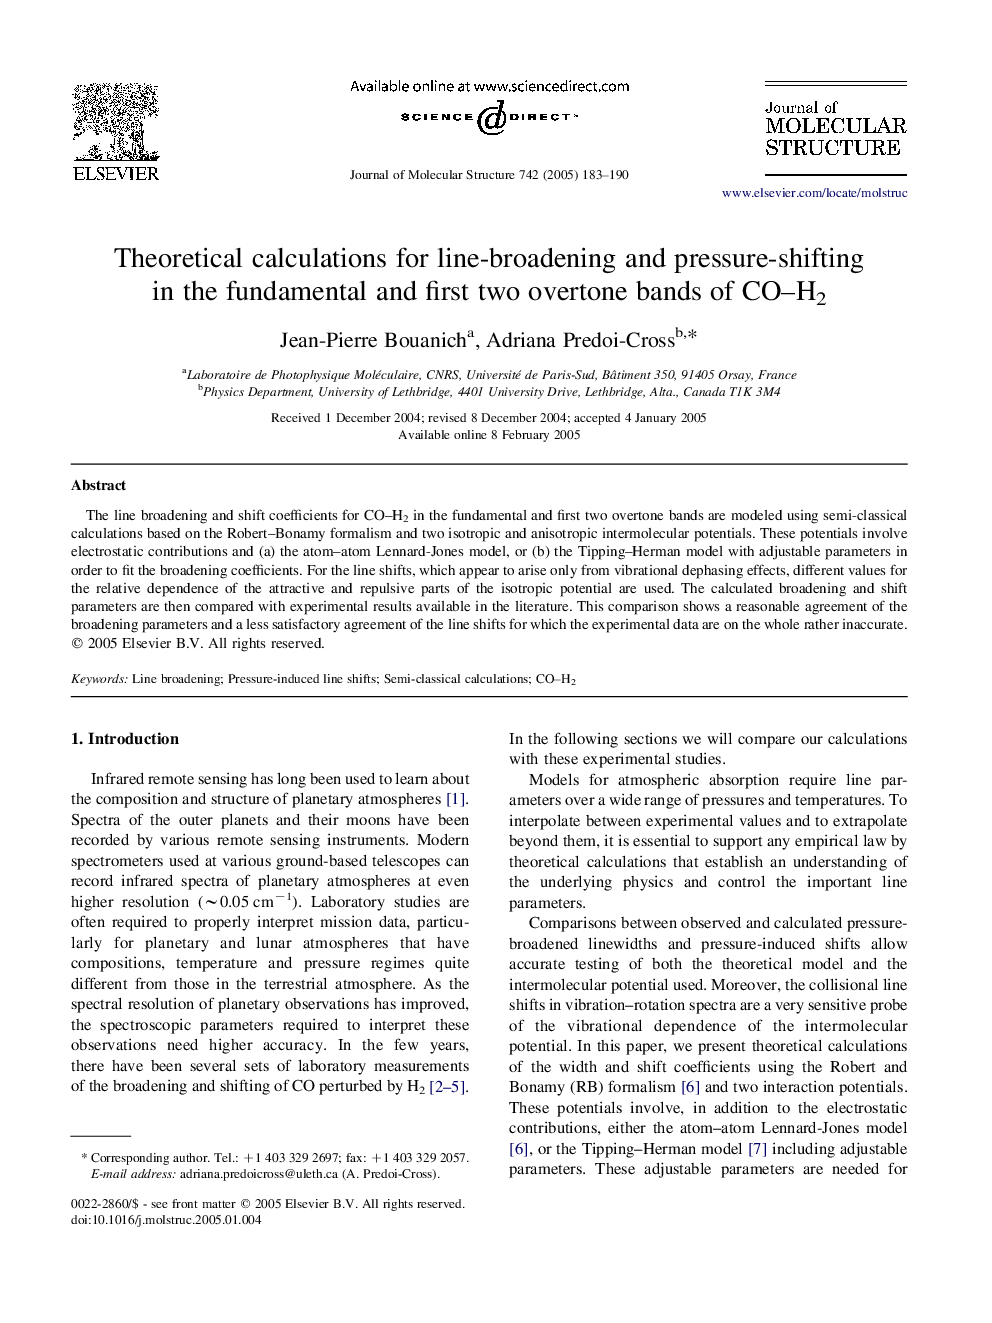 Theoretical calculations for line-broadening and pressure-shifting in the fundamental and first two overtone bands of CO-H2